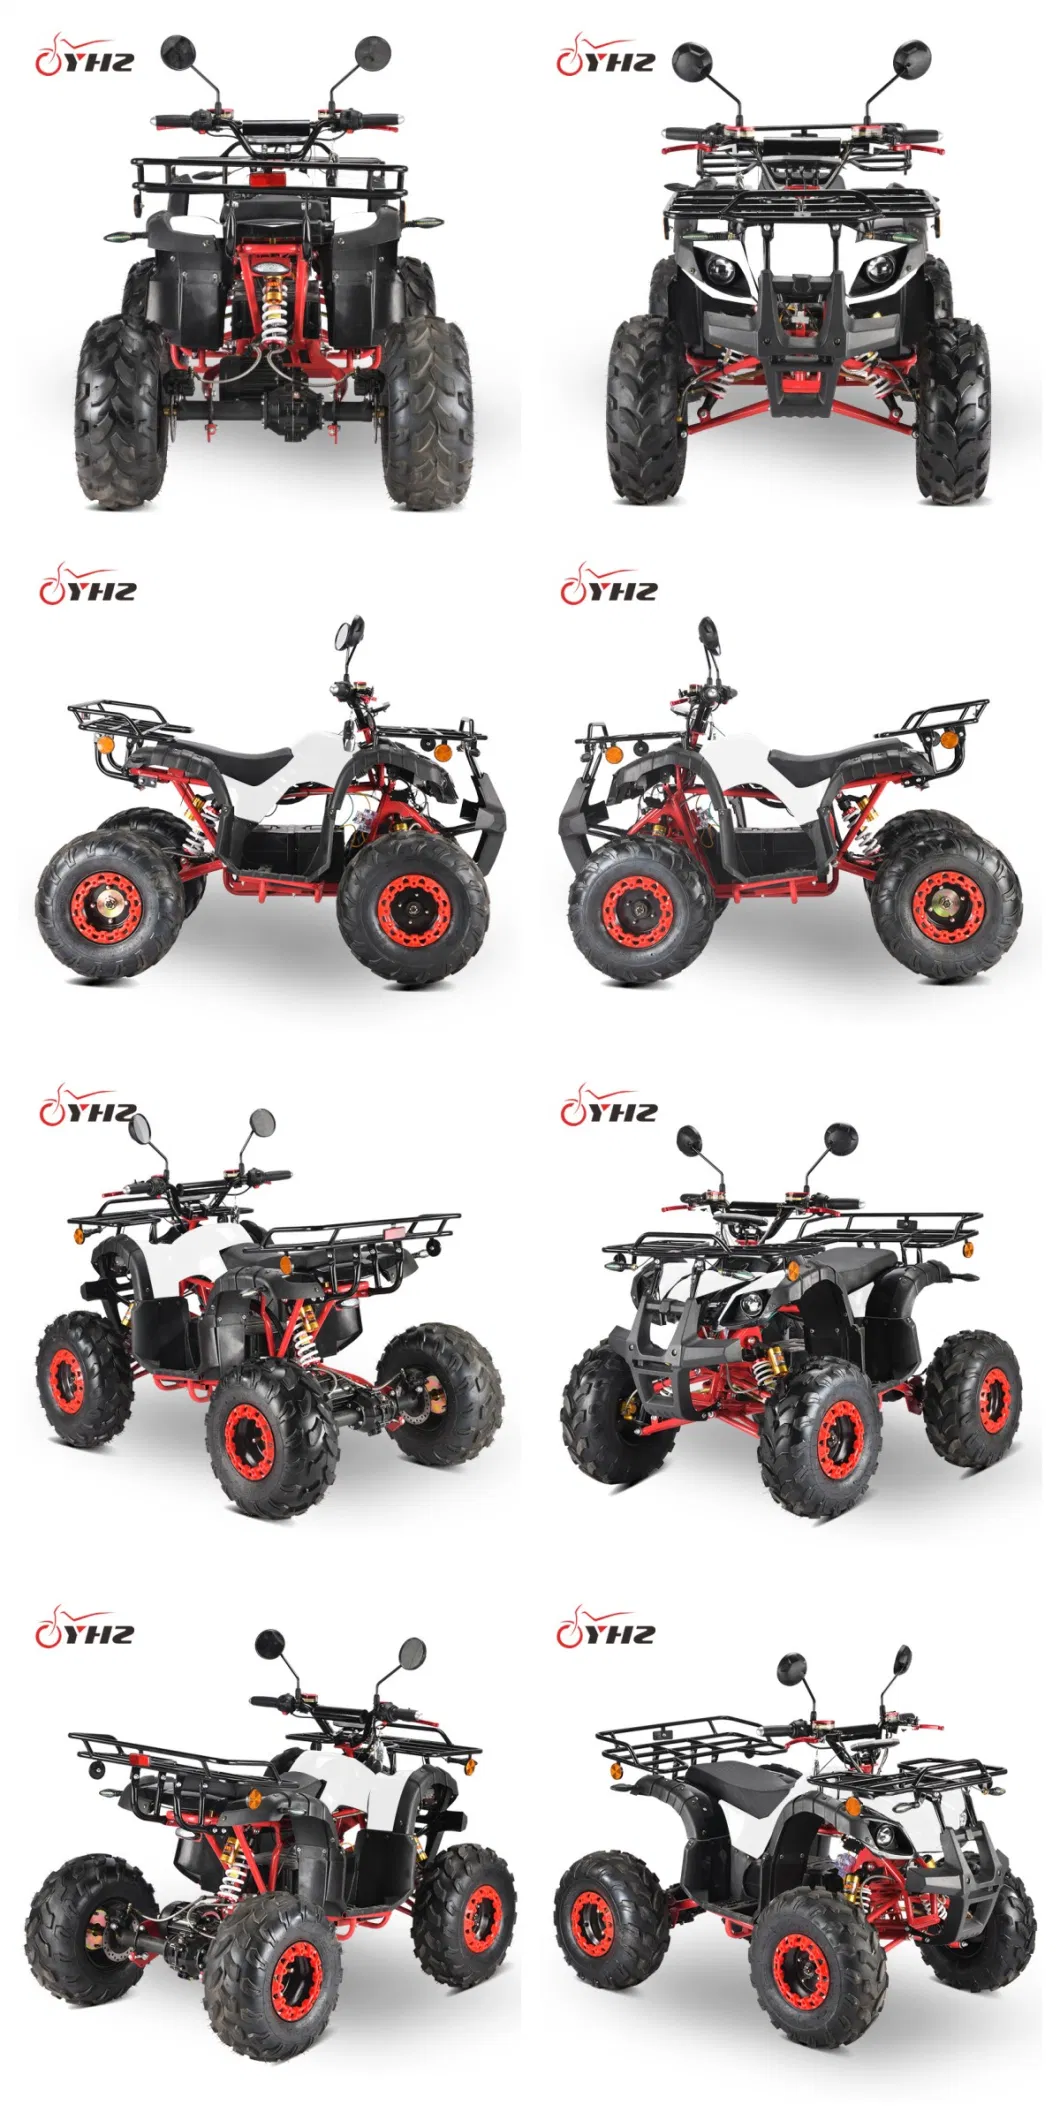 Four Wheeled All Terrain Vehicle off-Road Motorcycle Electric ATV&Quad 2000W EEC